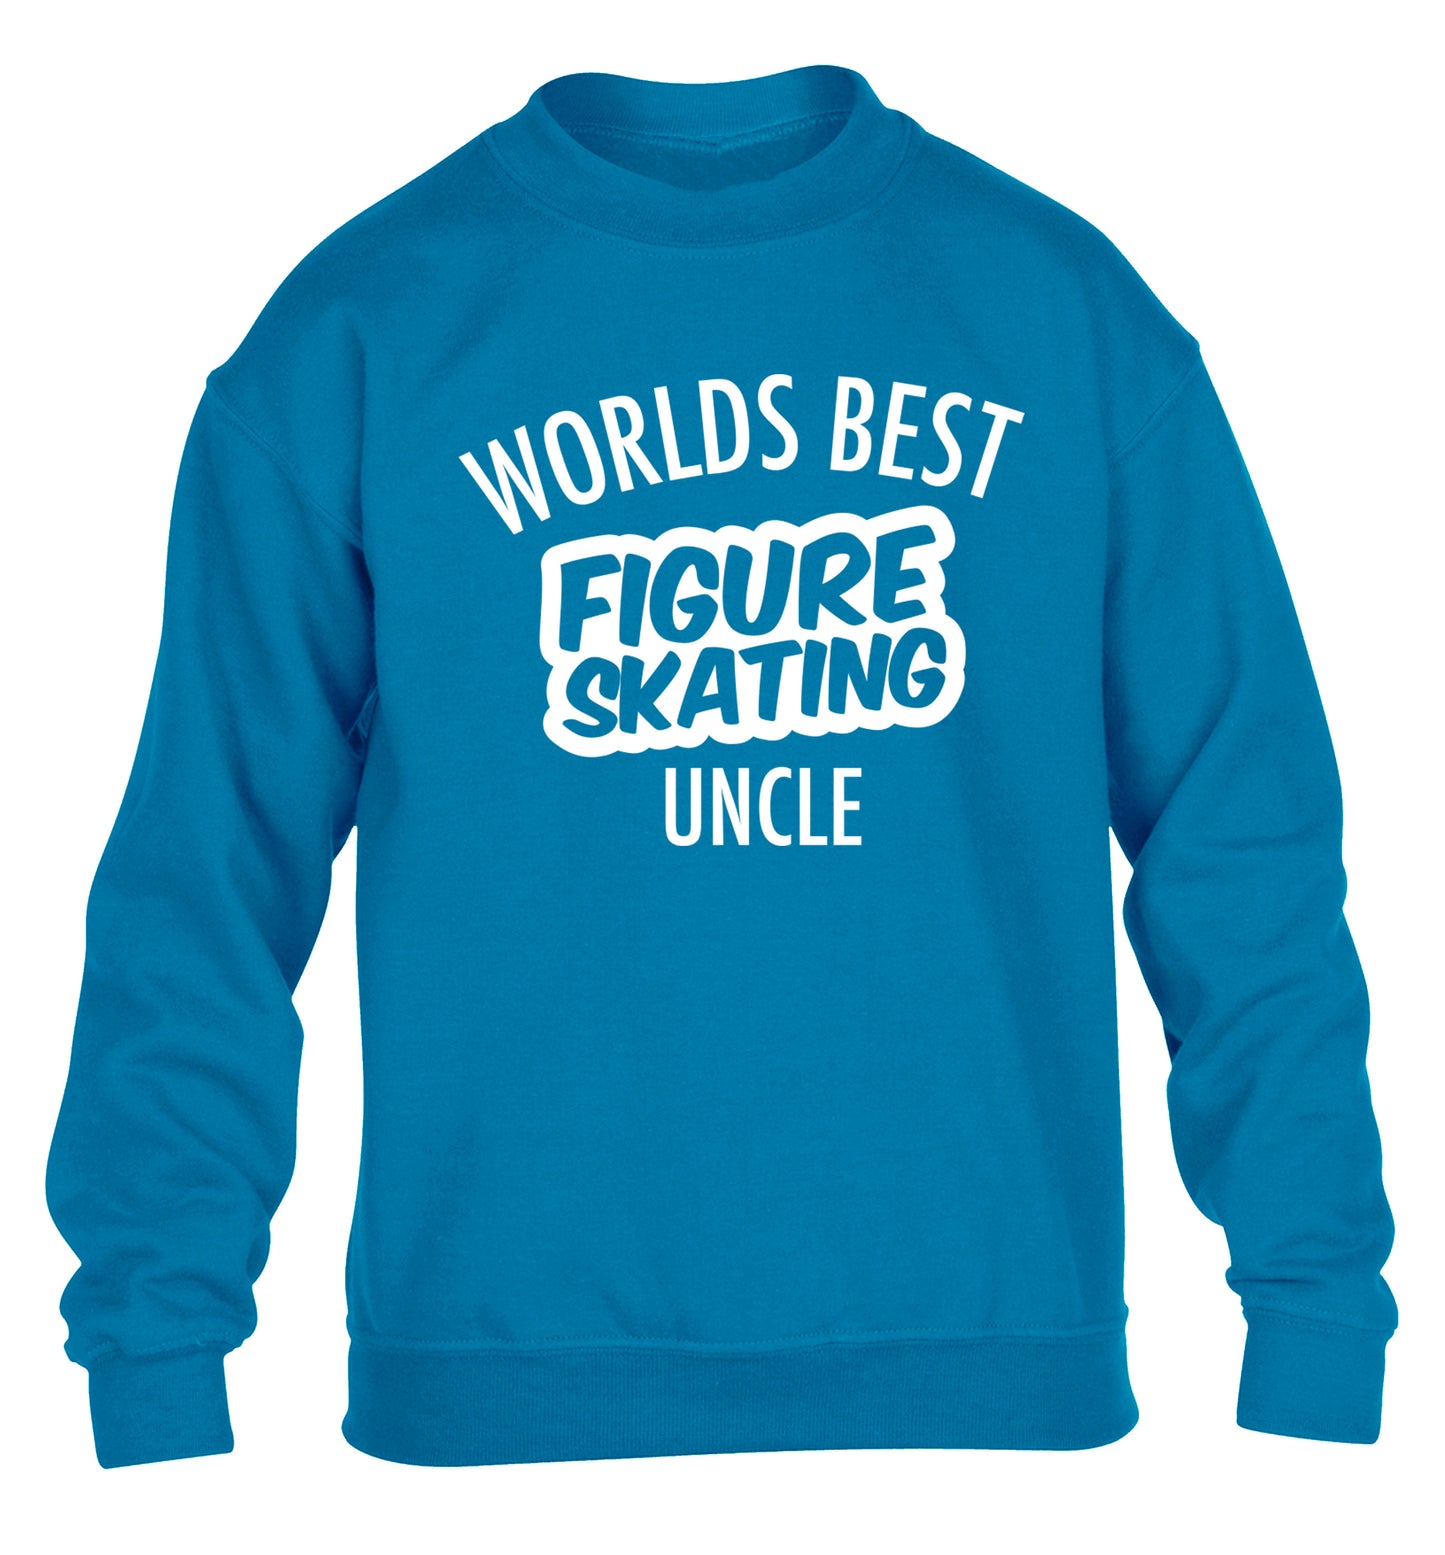 Worlds best figure skating uncle children's blue sweater 12-14 Years